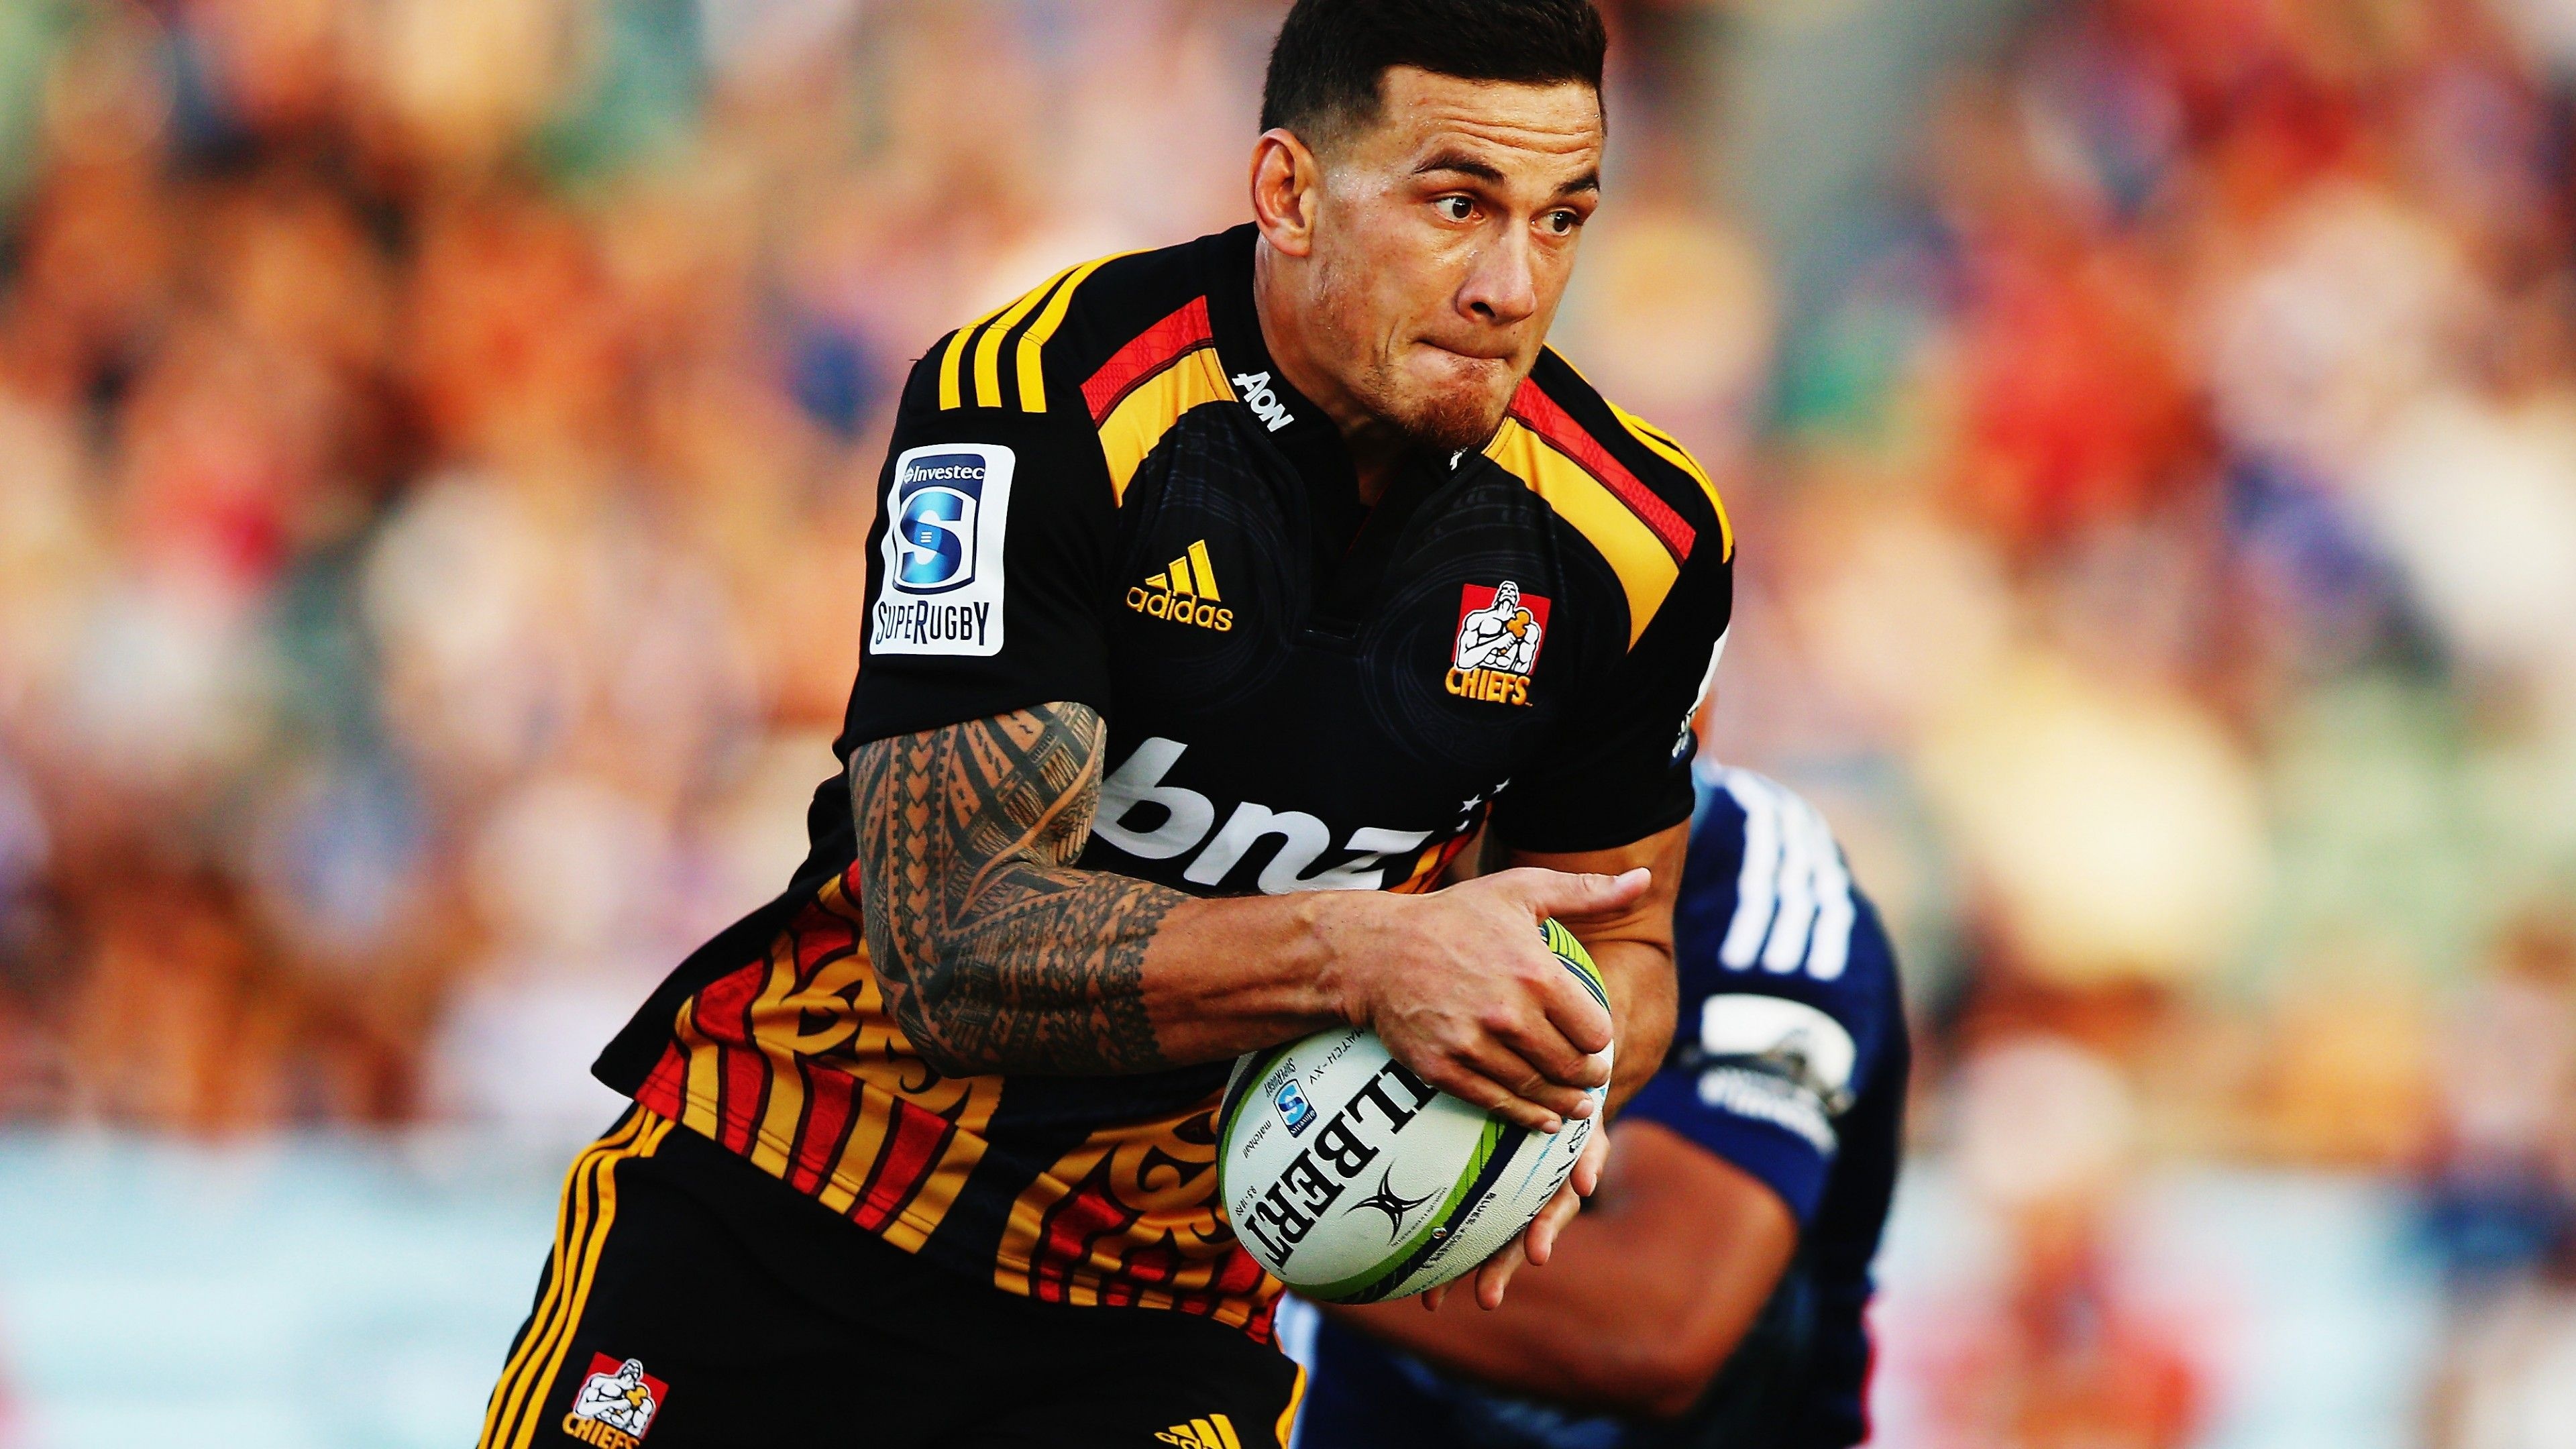 Rugby League: Sonny Bill Williams, A New Zealand heavyweight boxer, and a former professional football player. 3840x2160 4K Wallpaper.